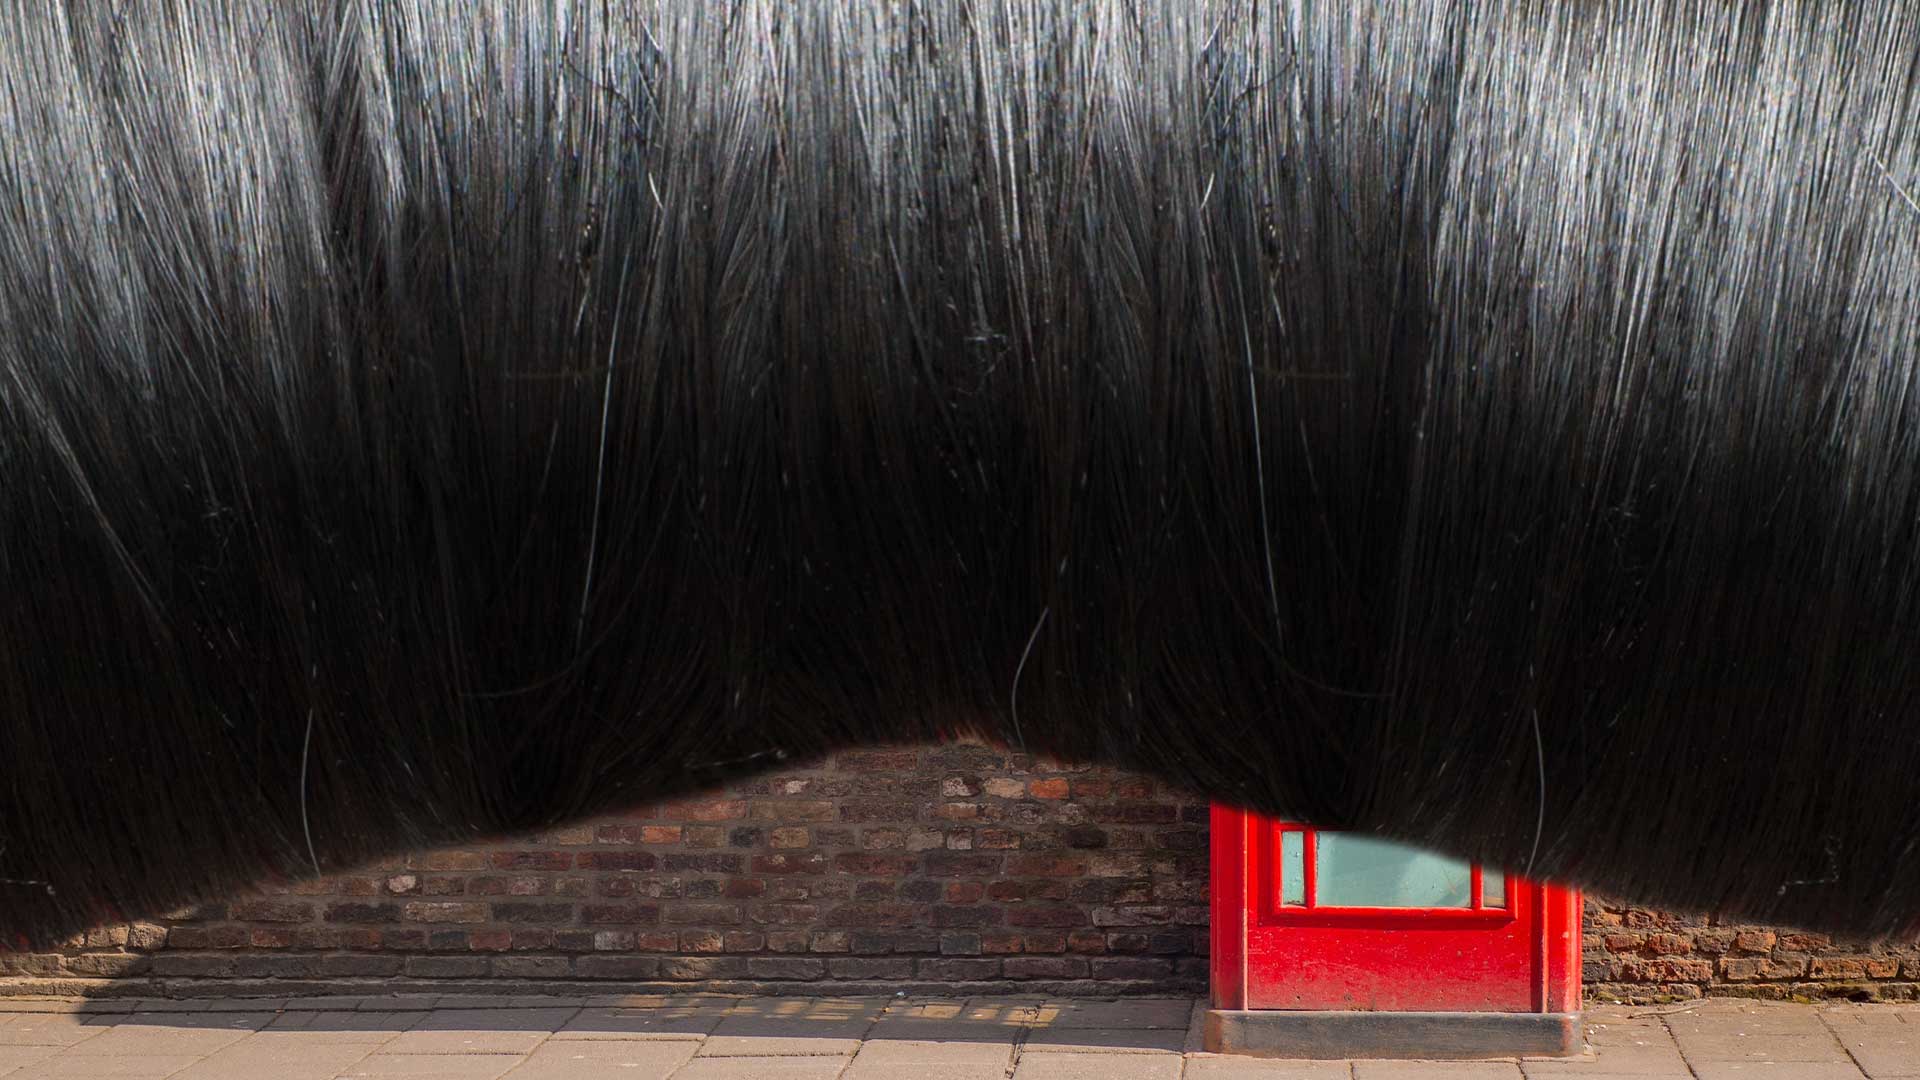 A long fringe obscuring an object in a British street